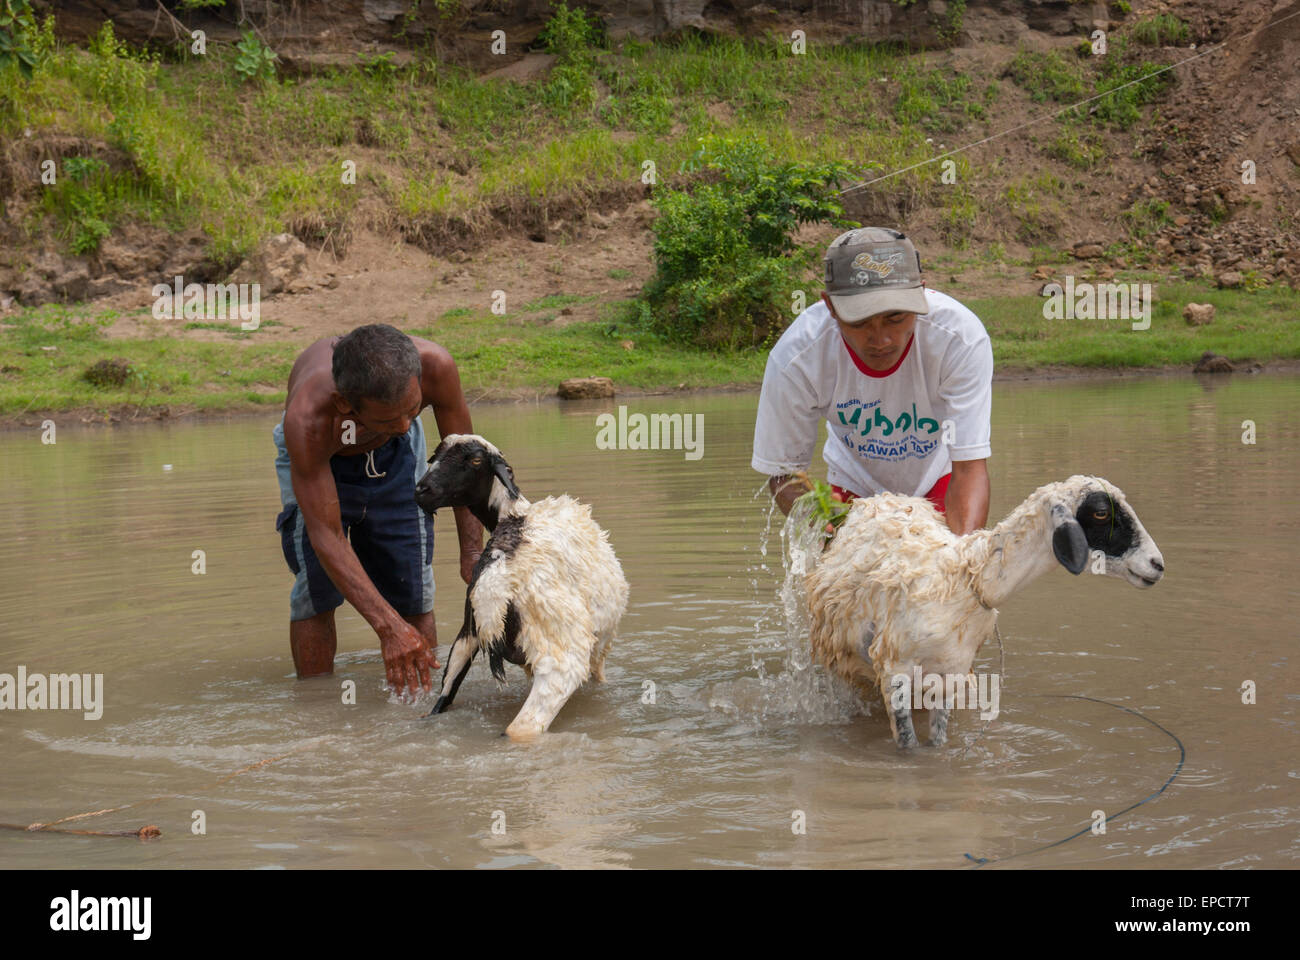 Local people are bathing goats on a small pond in rural area of Blora, Java, Indonesia. Stock Photo